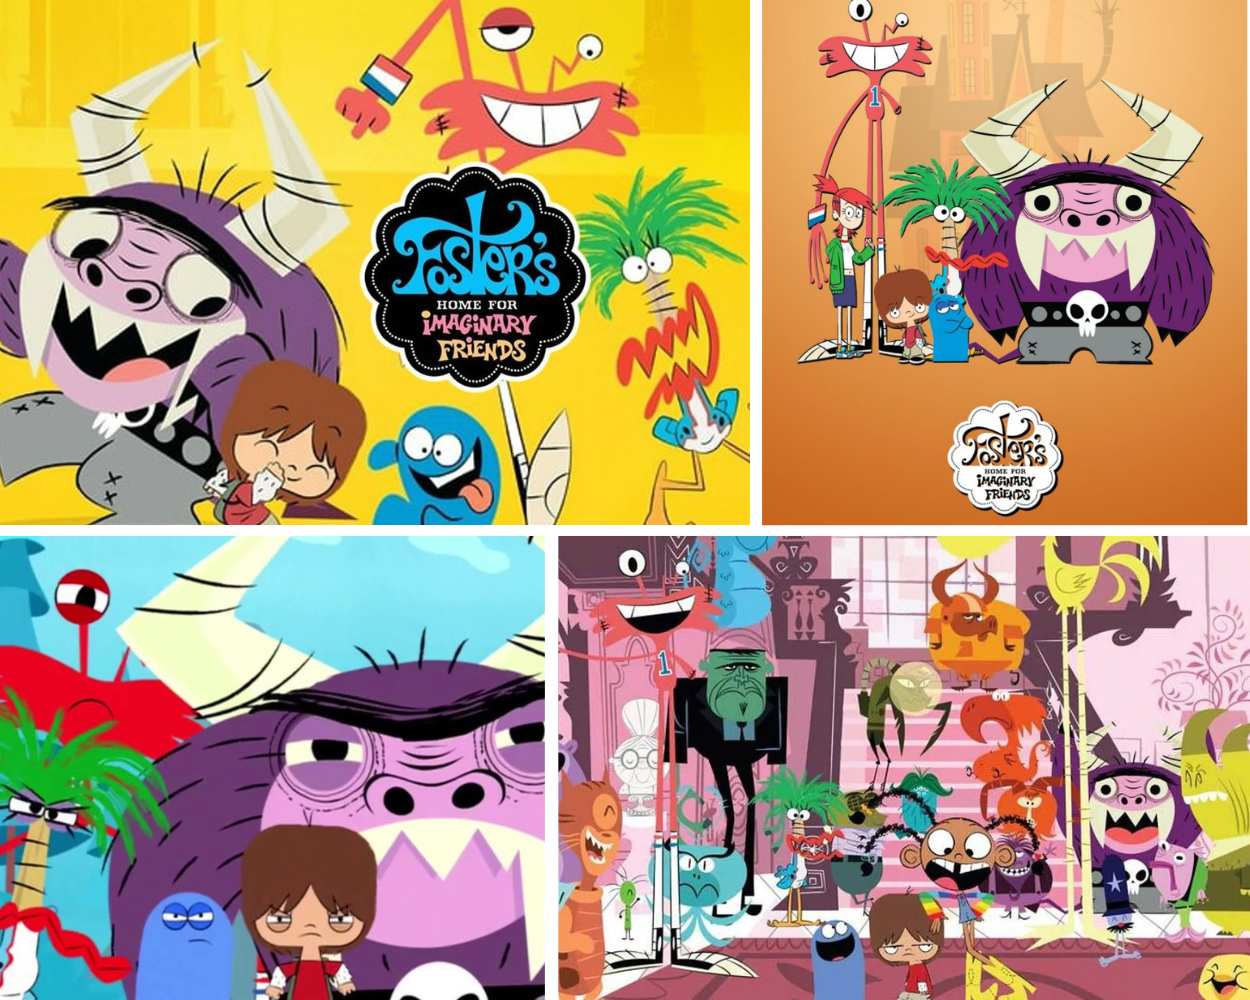 Foster's Home For Imaginary Friends (2004–2009)